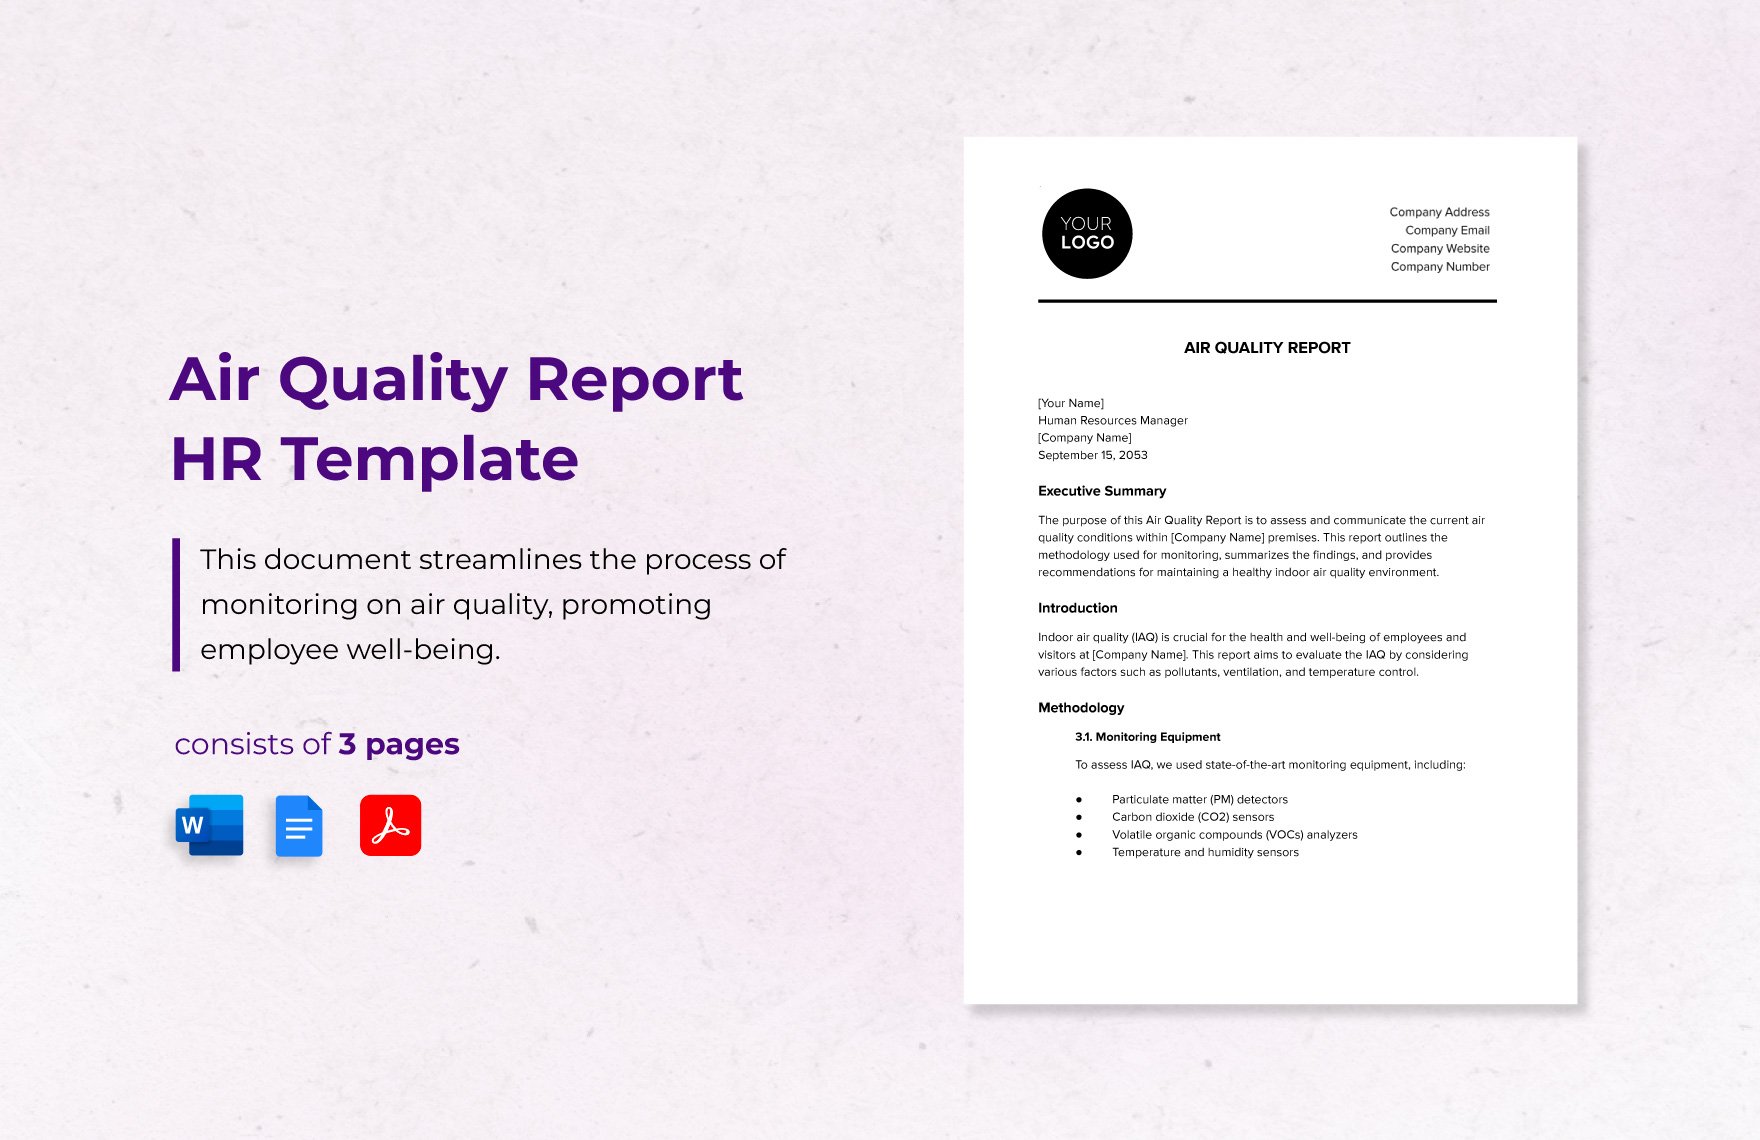 Air Quality Report HR Template